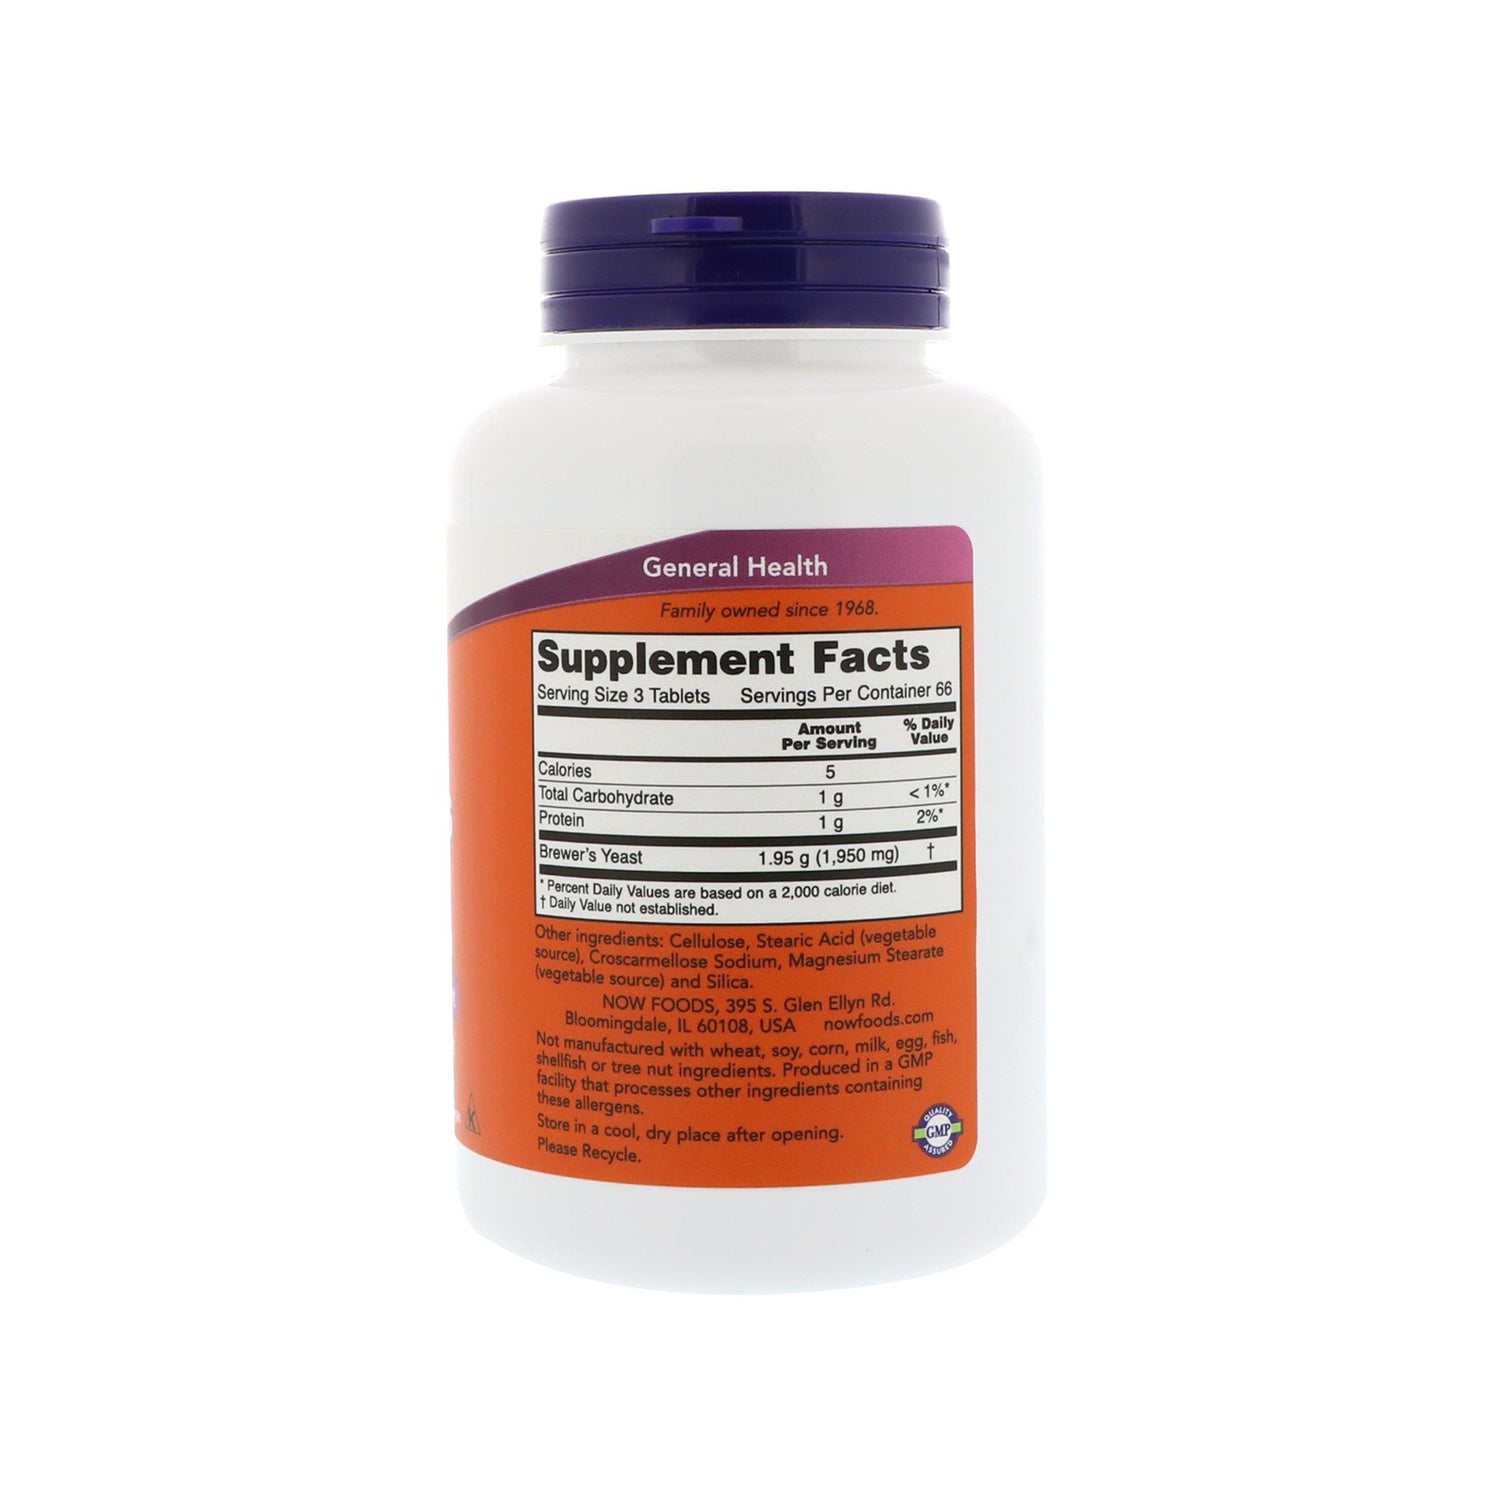 NOW Foods, Brewer's Yeast 650 mg with naturally occurring B-Vitamins, 200 Tablets - Bloom Concept